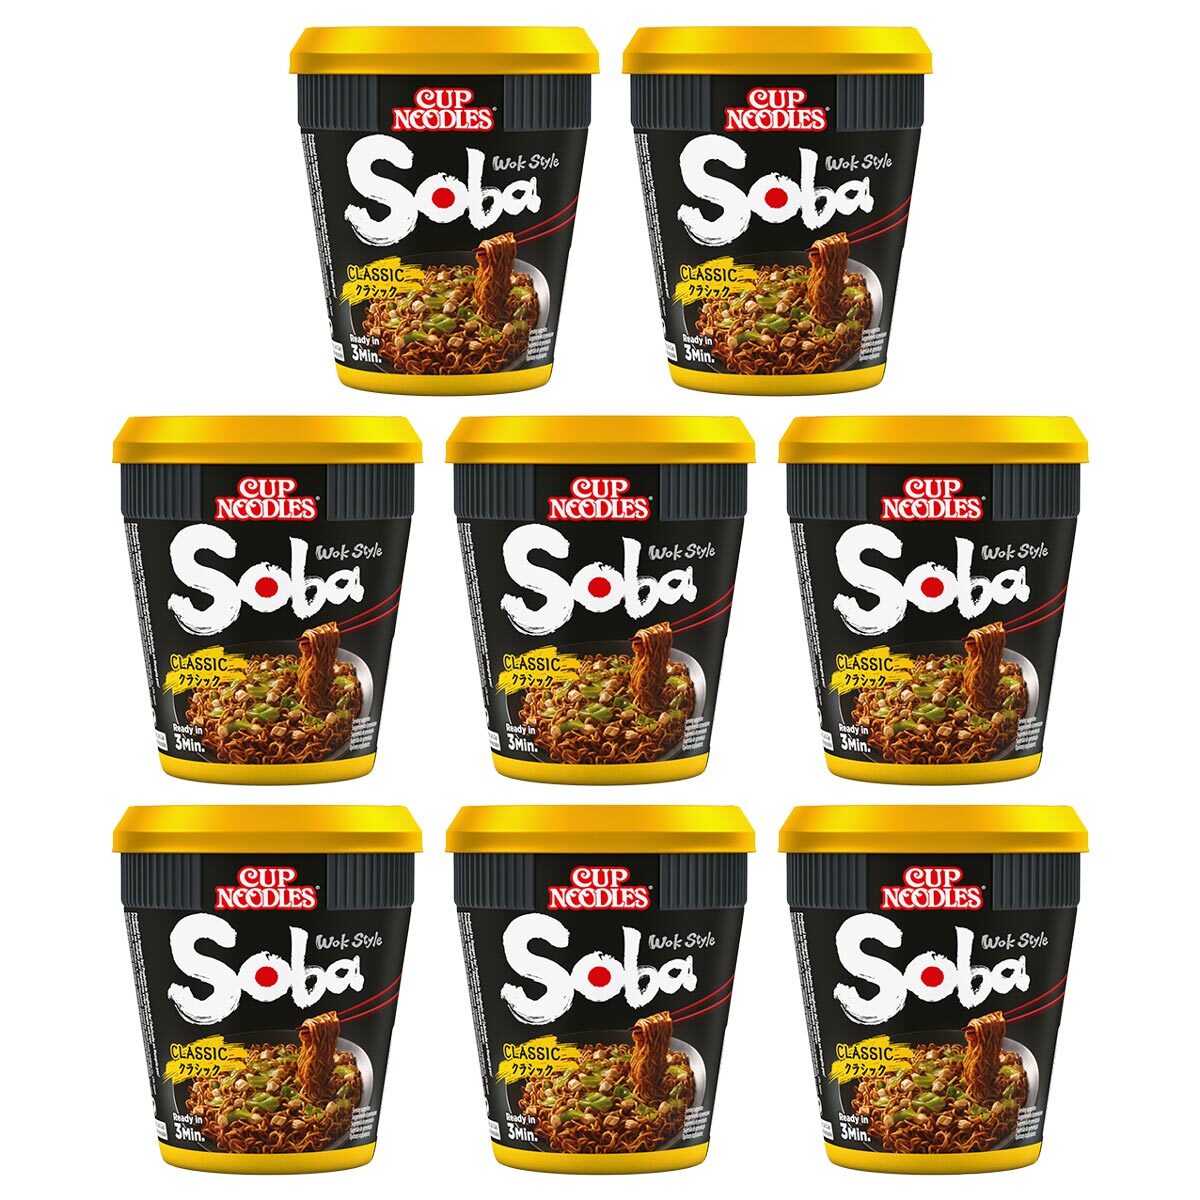 Nissin Soba Cup Classic Noodles, 8 x 90g